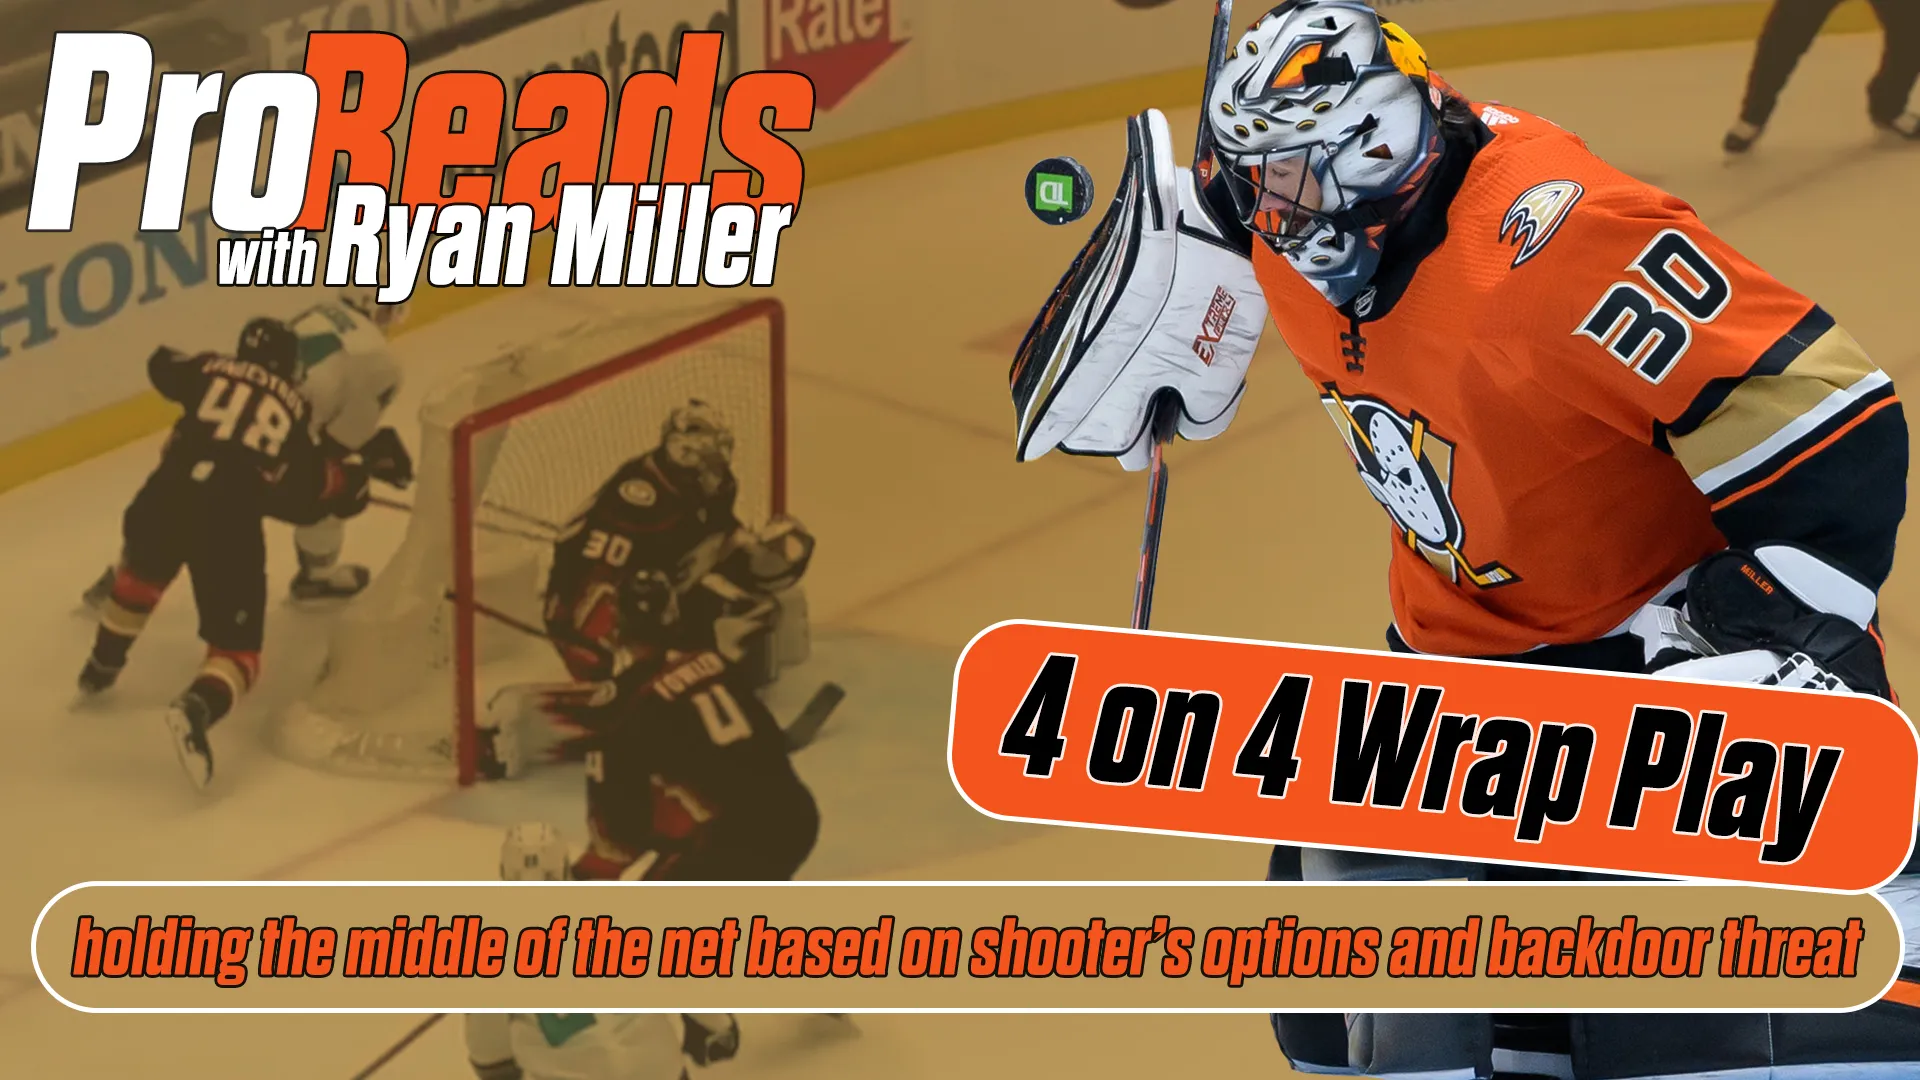 Pro-Reads with Ryan Miller 4 on 4 Wrap